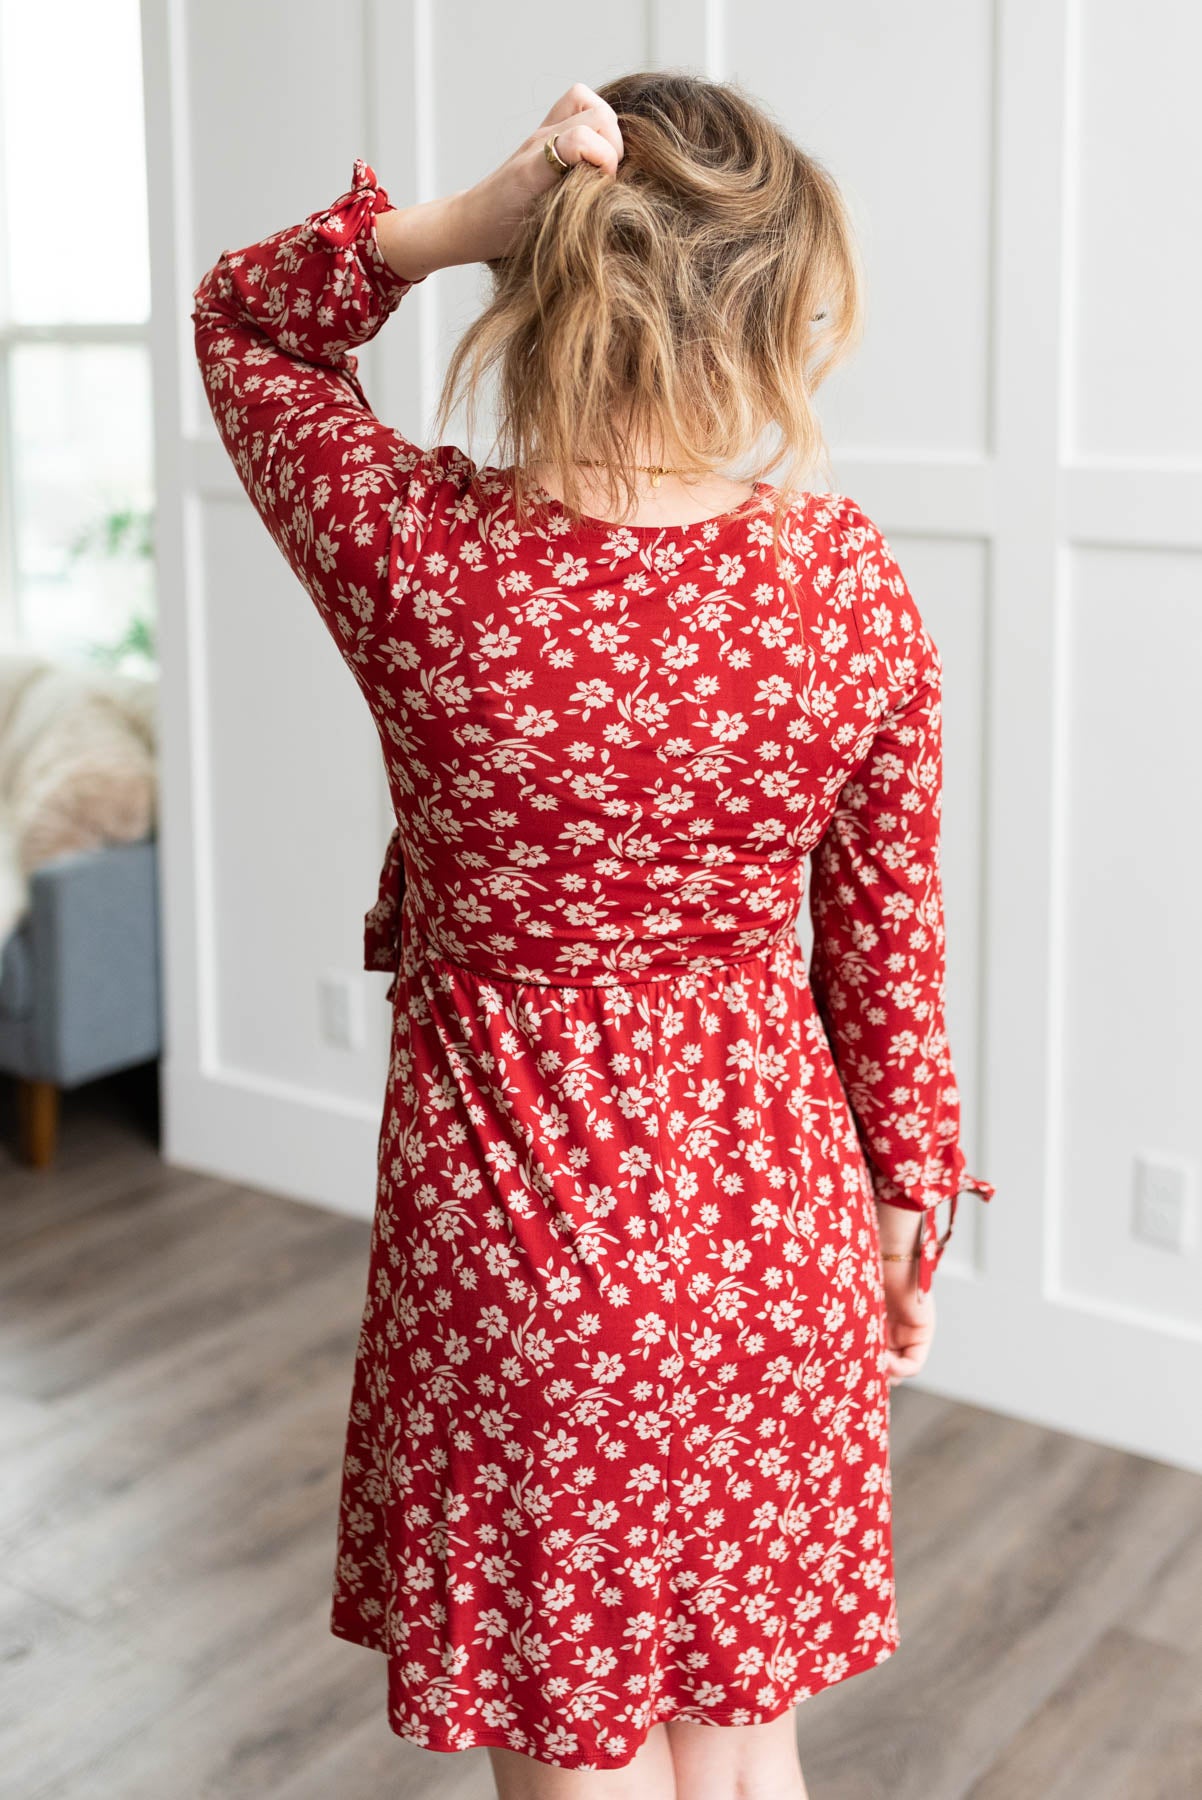 Back view of a red floral dress